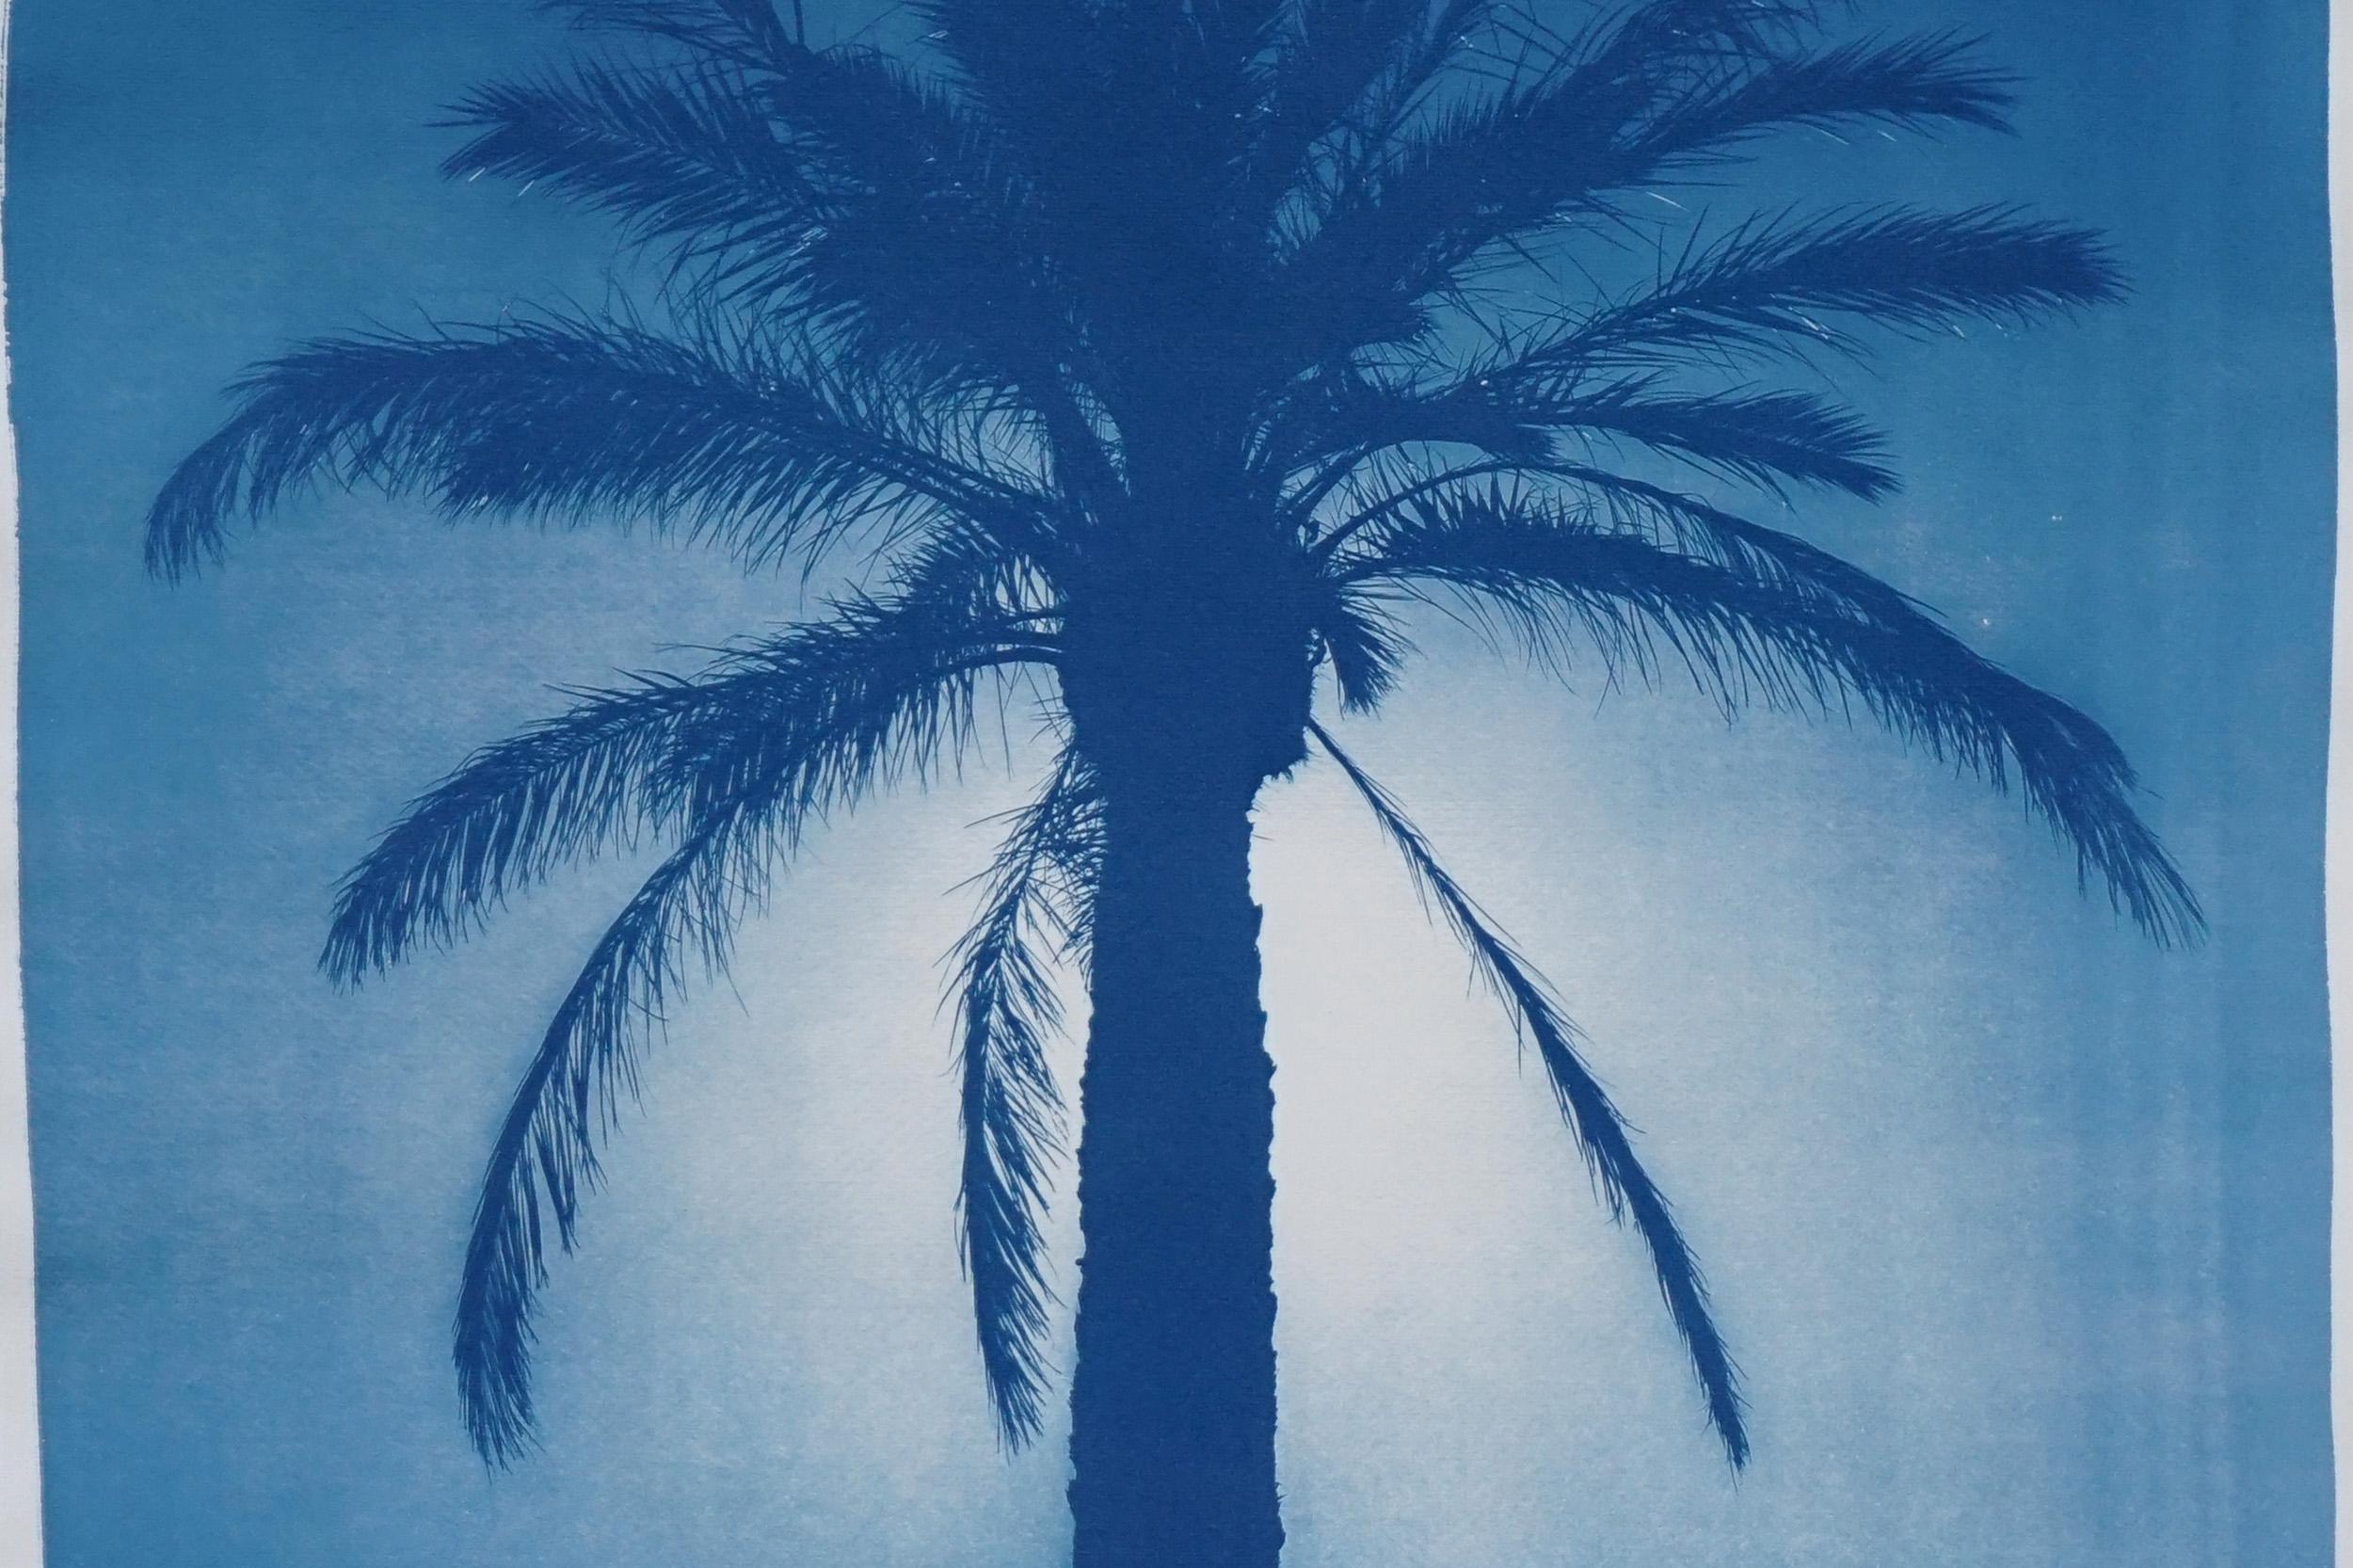 This is an exclusive handprinted limited edition cyanotype.
This cyanotype shows a desert palm tree located in the majestic mediterranean city of Cairo, Egypt.  

Details:
+ Title: Cairo Citadel Palm
+ Year: 2021
+ Edition Size: 50
+ Stamped and